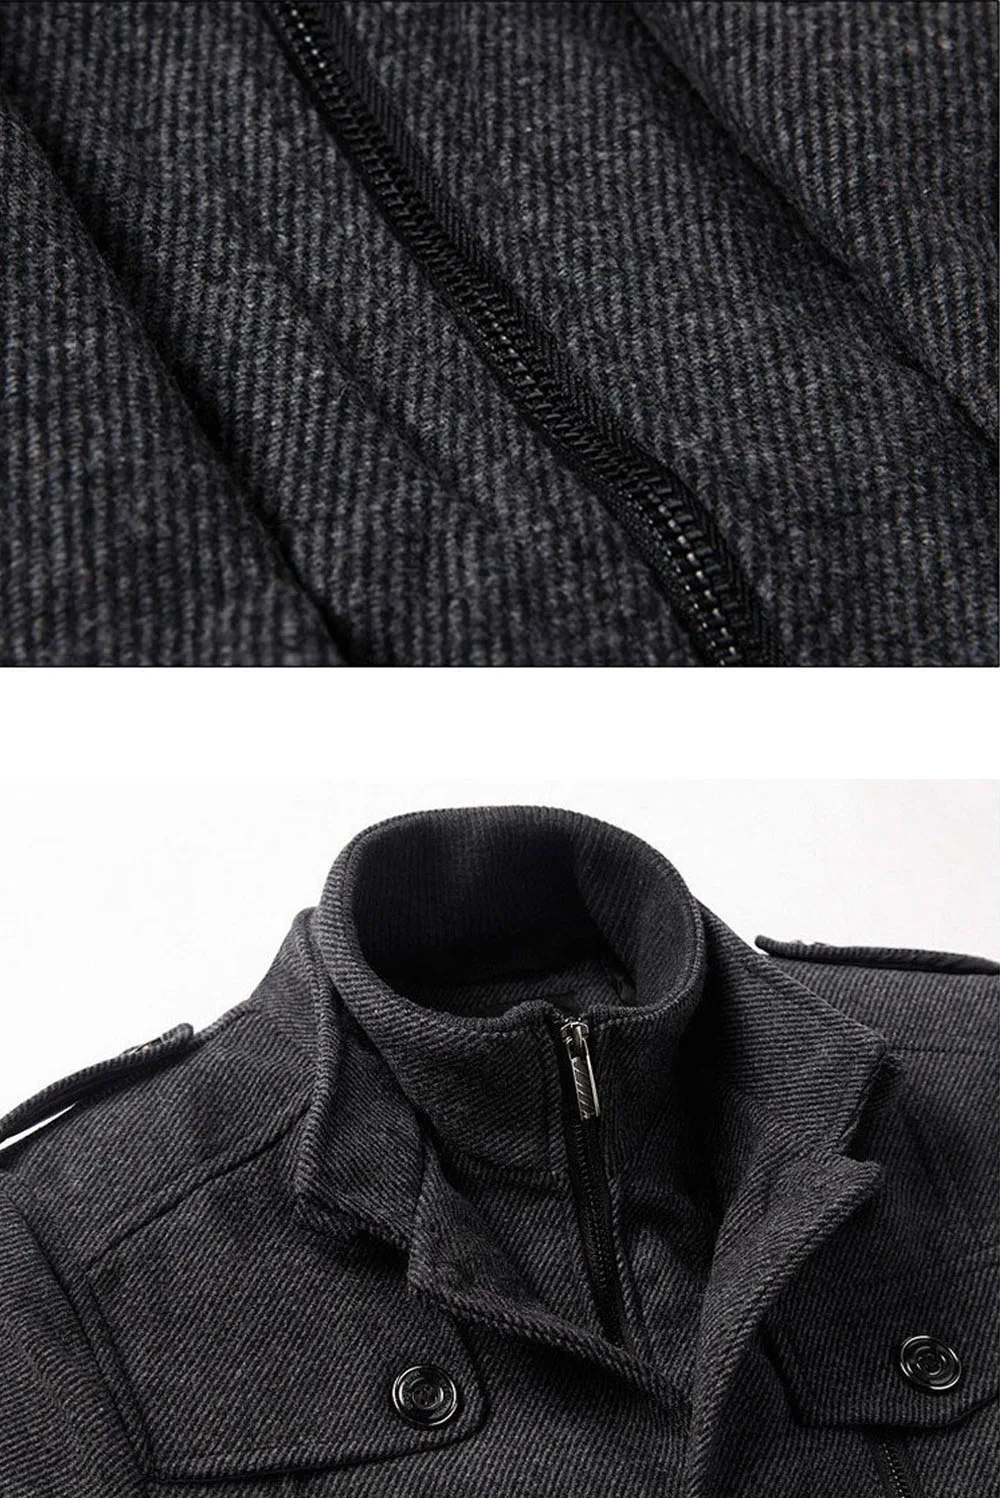 

Coat Man Young Jacket Men Wool Jacket Slim Fit Thickening Winter Coat Male Short Trench Style Fashion Outerwear Casual Jacket